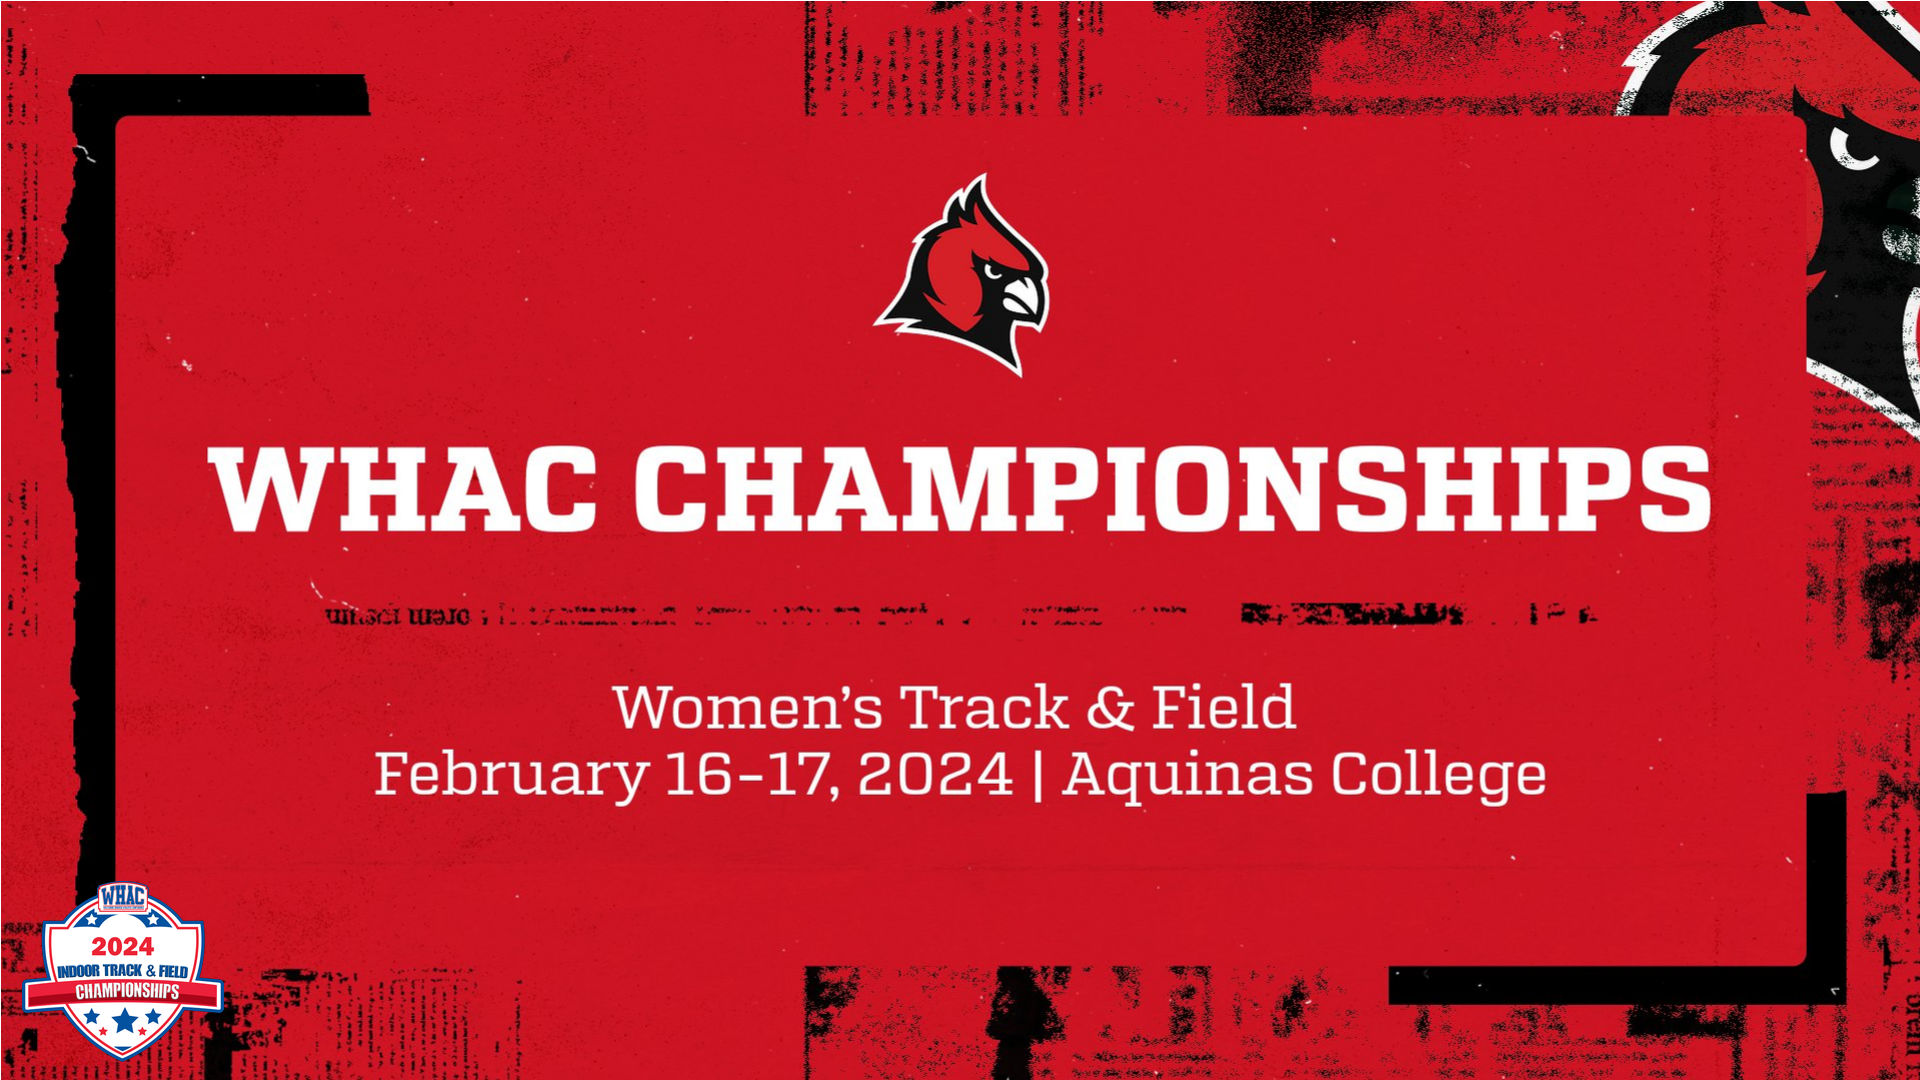 WHAC CHAMPIONSHIP PREVIEW: Women's Track & Field set to compete at the WHAC Championships this weekend